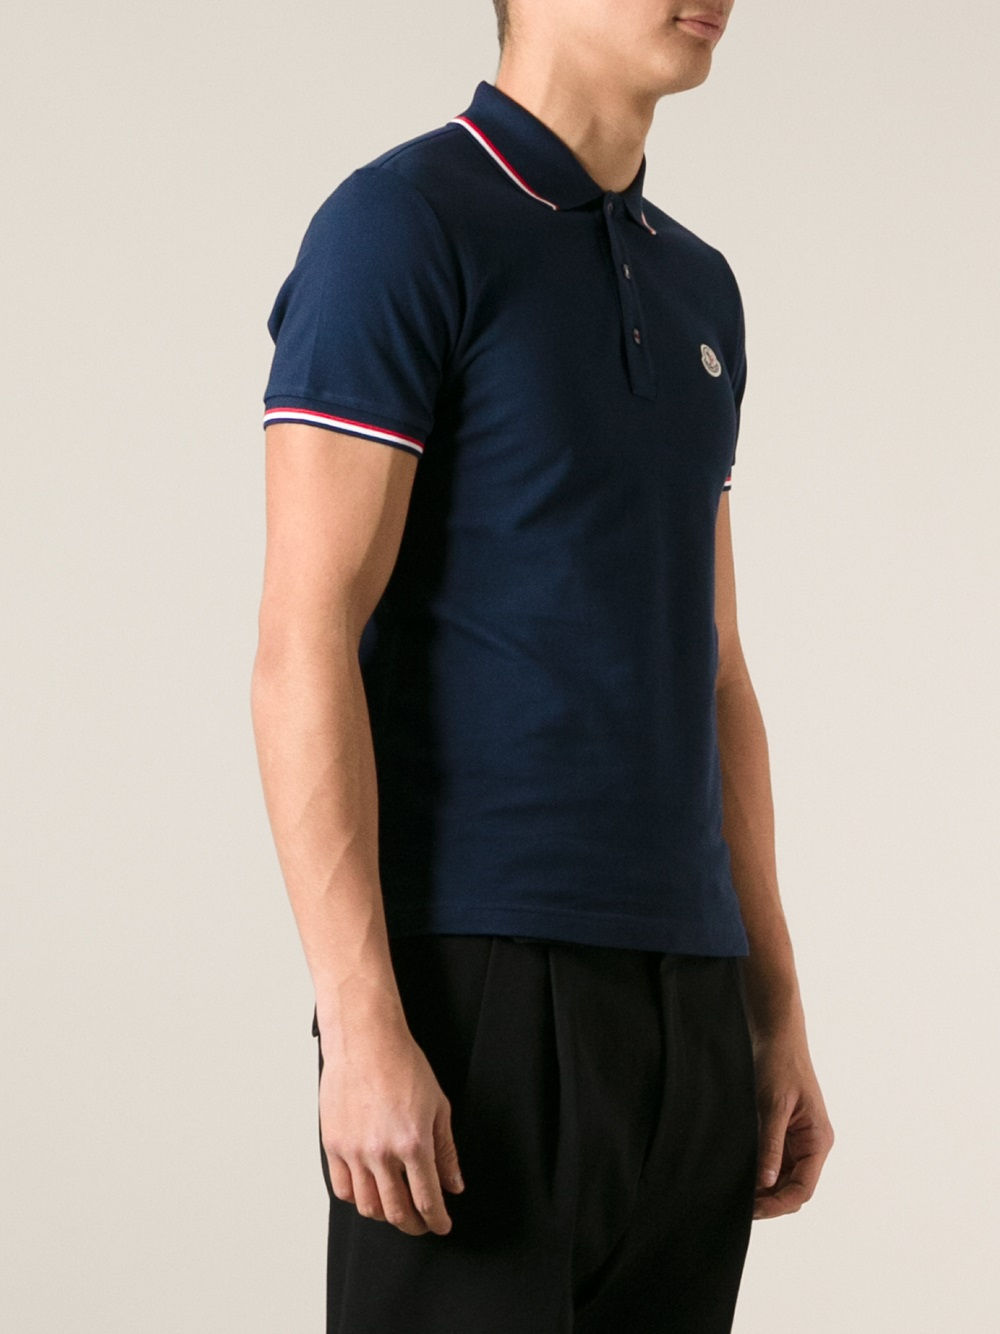 Moncler Classic Polo Shirt in Blue for Men - Lyst